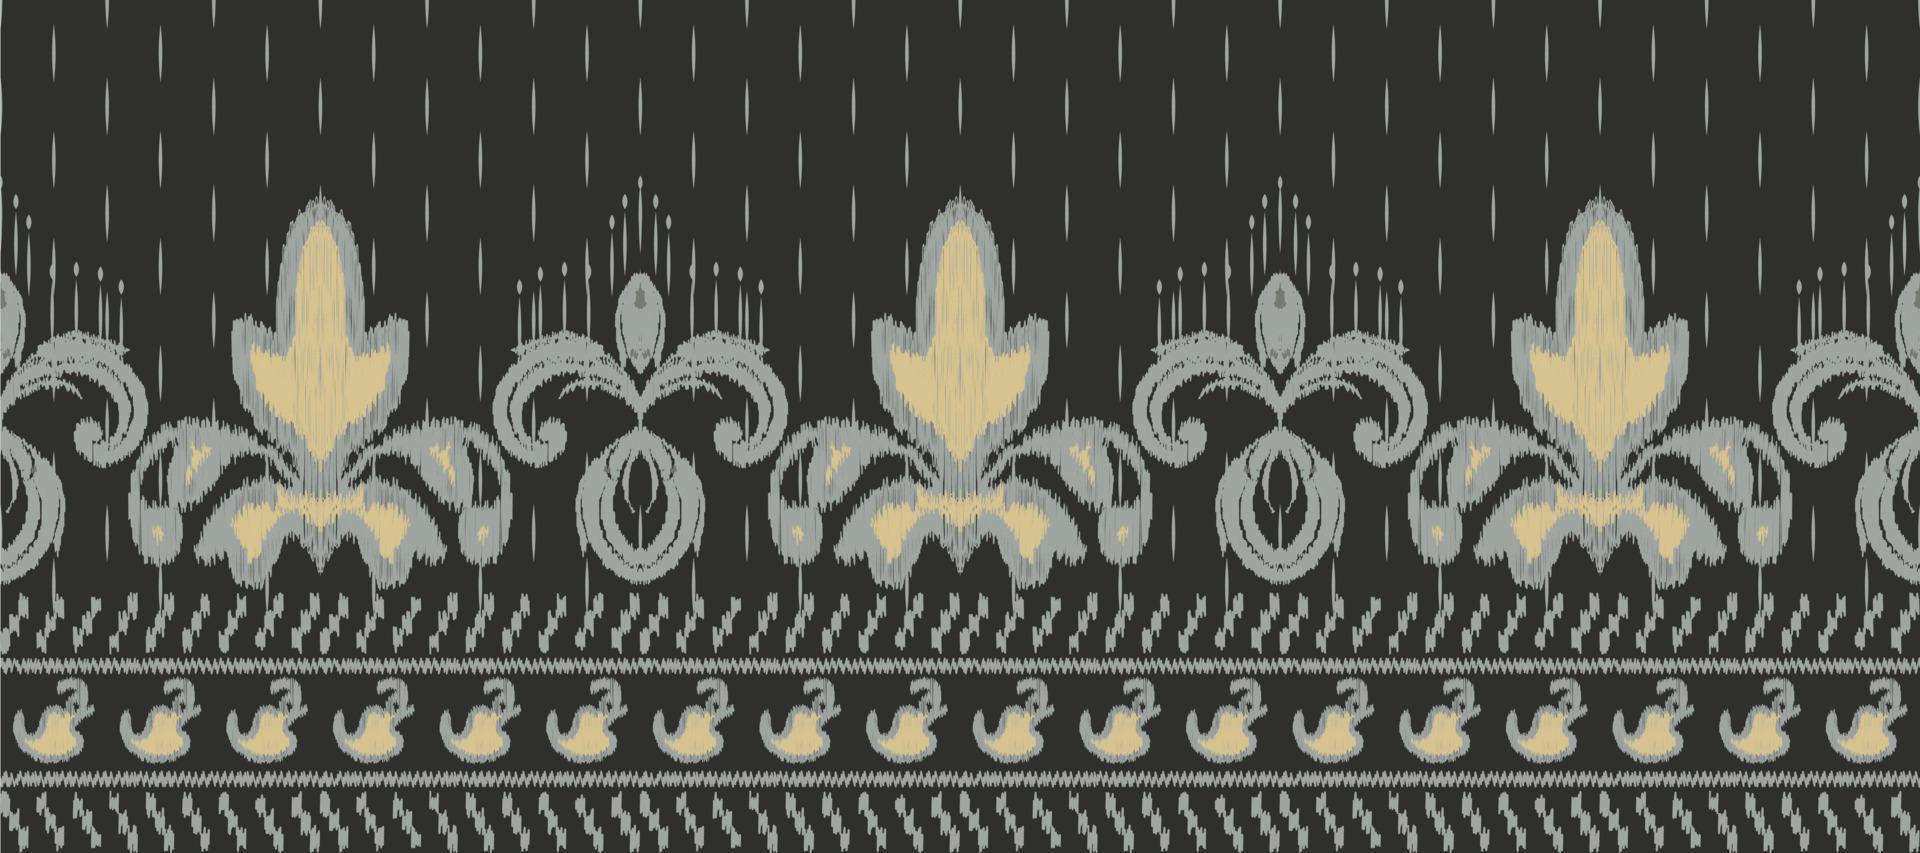 African Ikat fabric paisley embroidery background. geometric ethnic oriental pattern traditional. Ikat Aztec style abstract vector illustration. design for print texture,fabric,saree,sari,carpet.